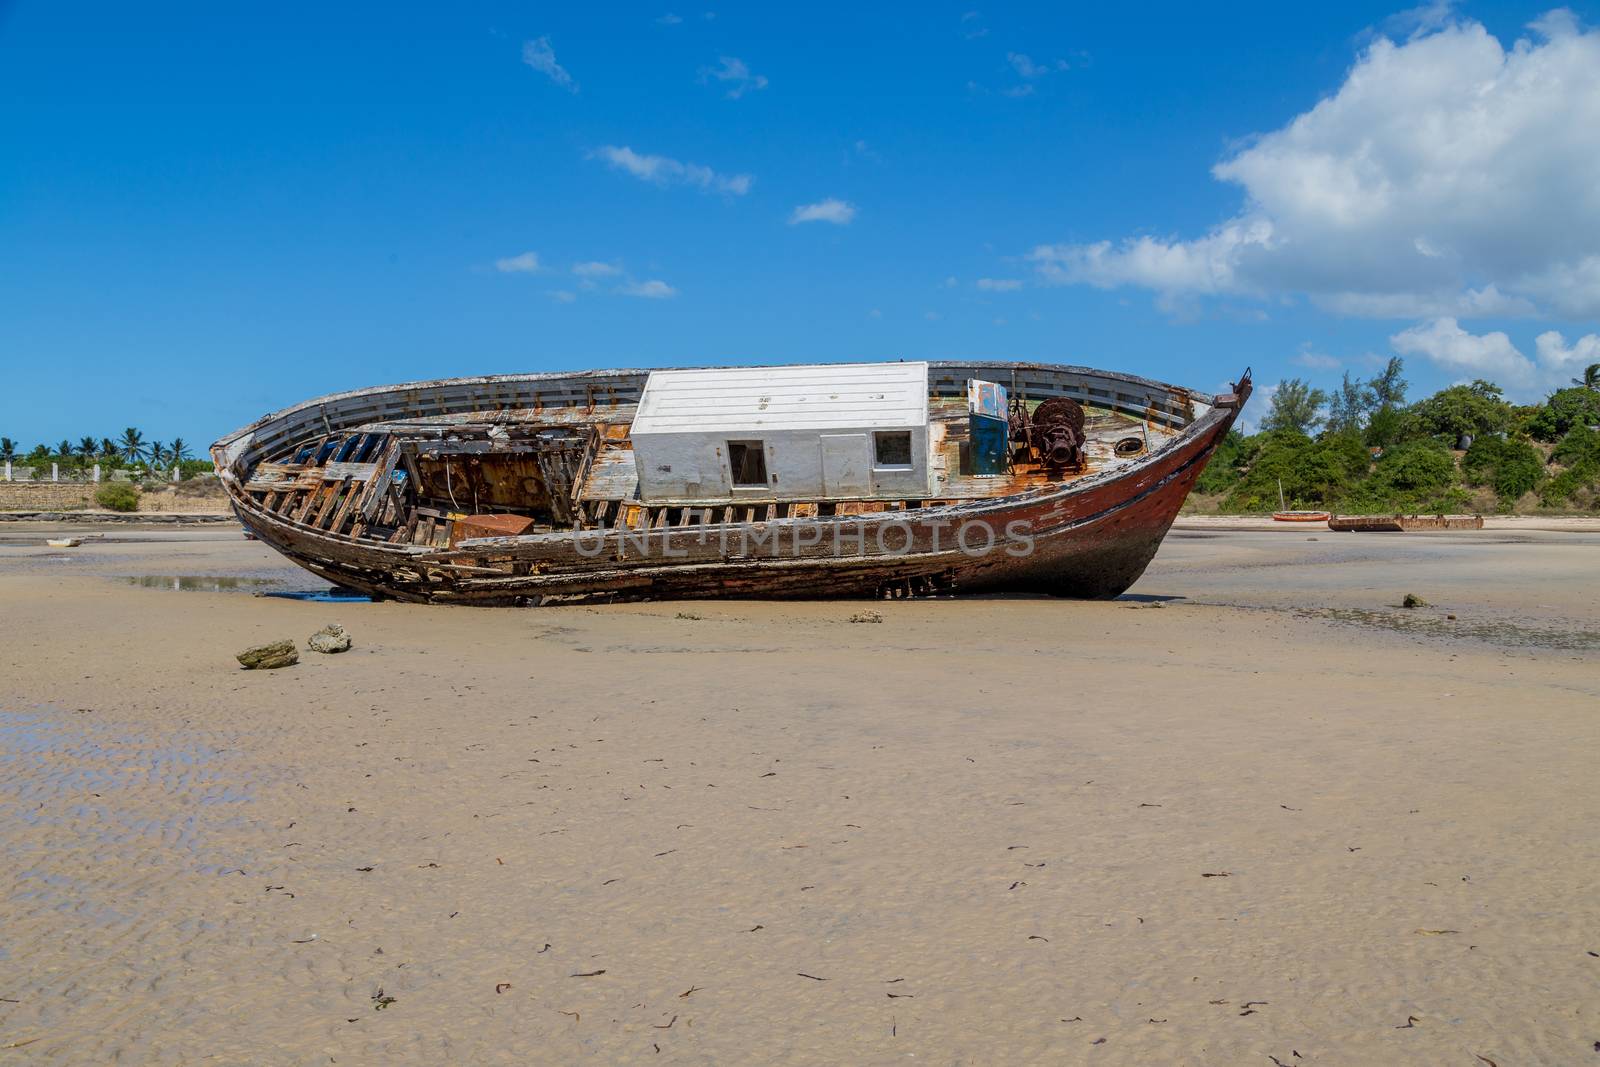 Old boat at Magaruque island formerly Ilha Santa Isabel is part of the Bazaruto Archipelago off the coast of Mozambique.